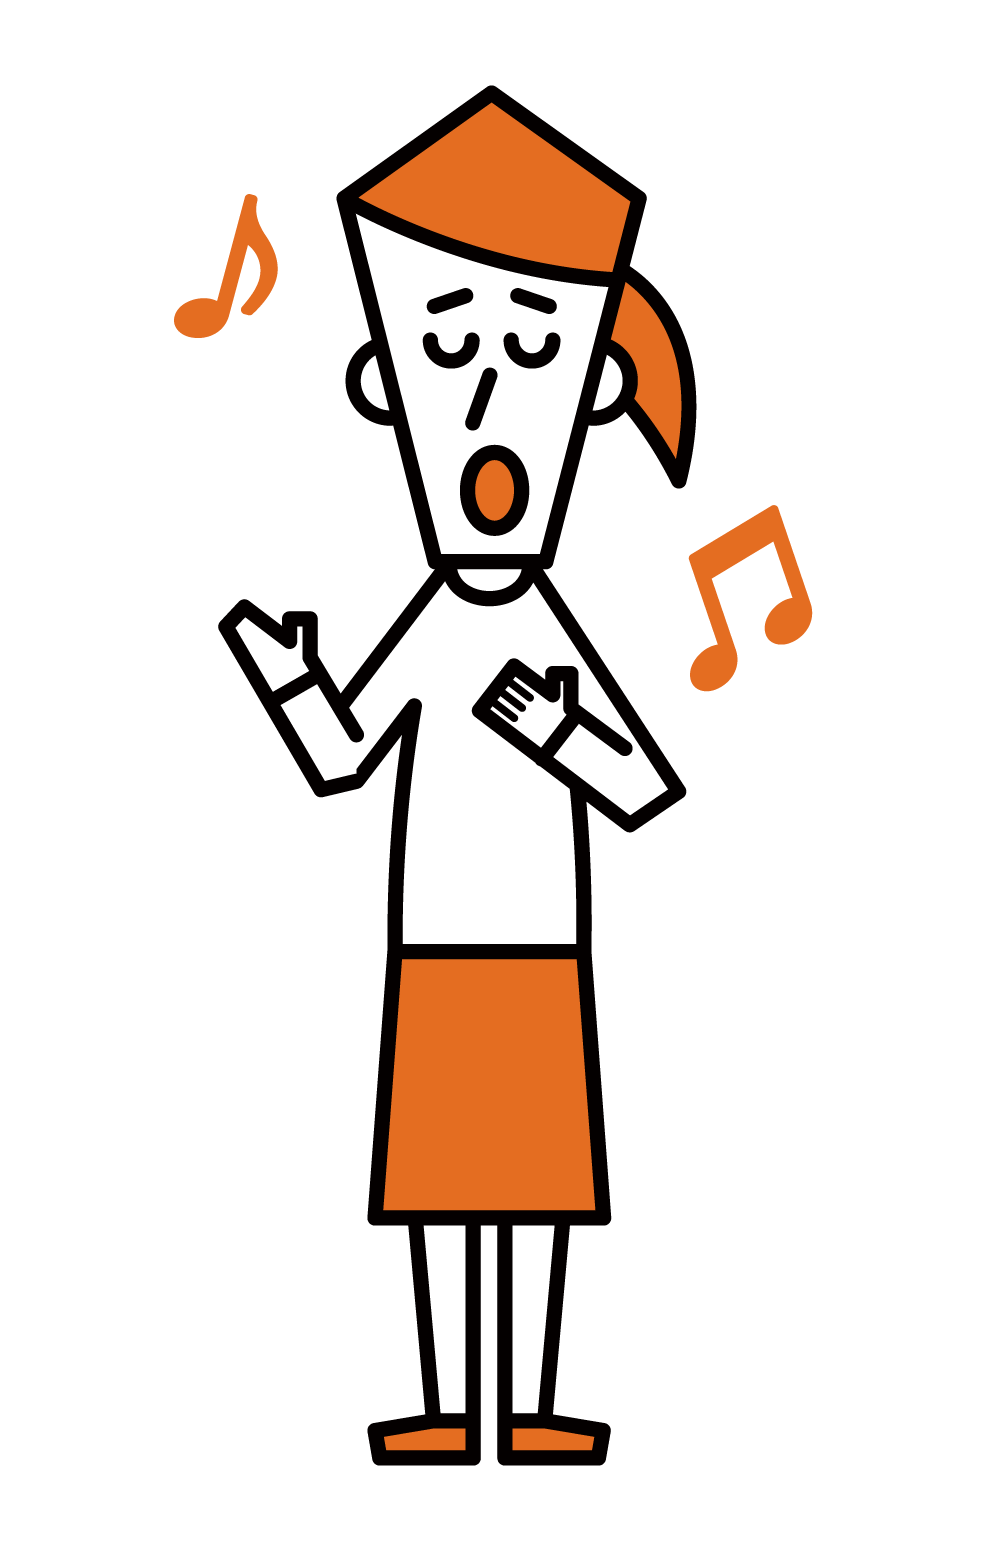 Illustration of a woman who sings a song